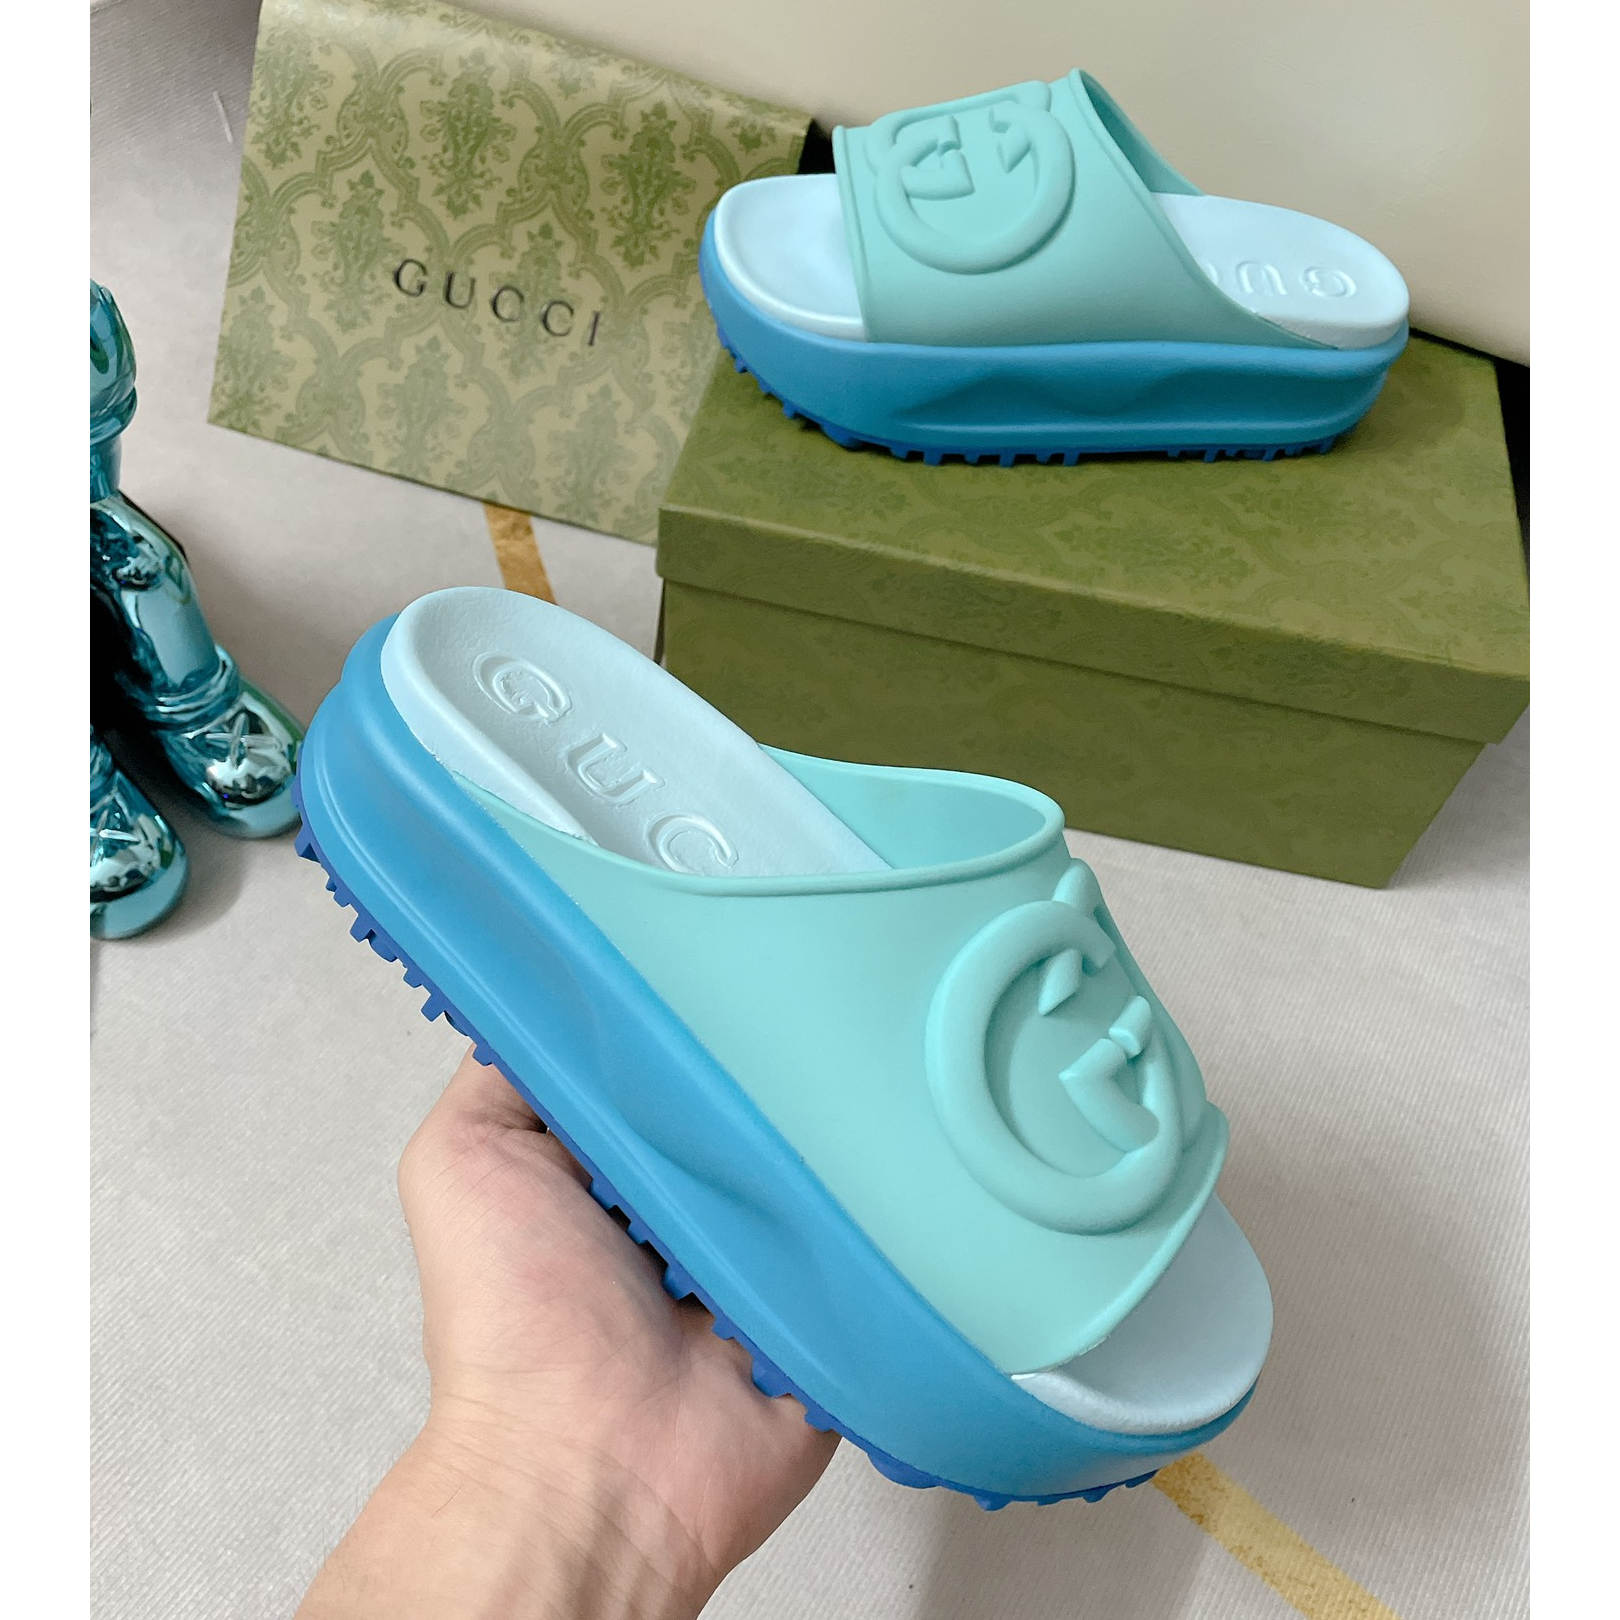 Gucci GG Thick soled slippers - DesignerGu